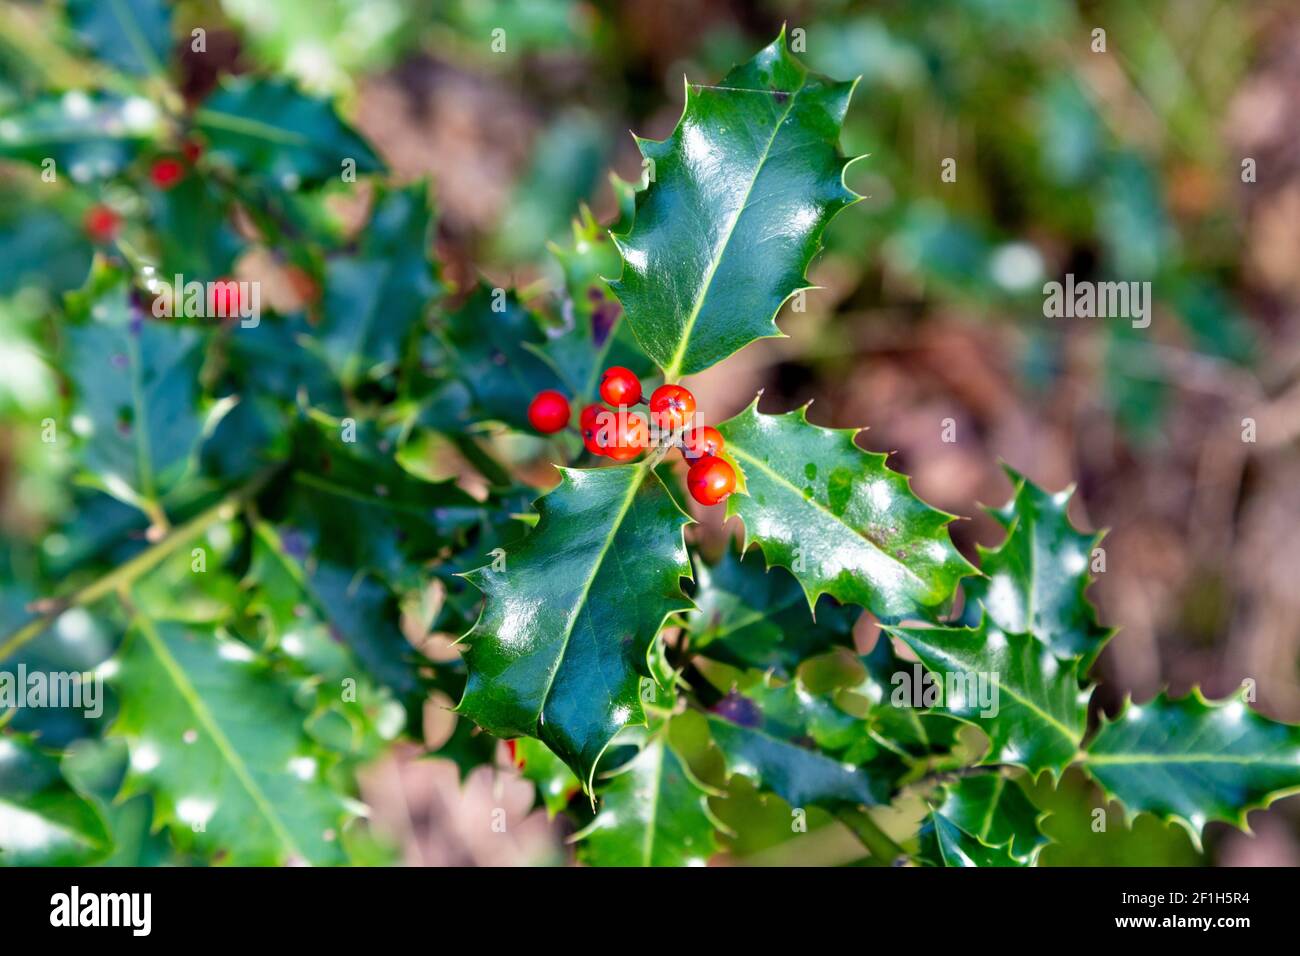 Holly plant (Ilex) with glossy green leaves with spikes and red fruit Stock Photo